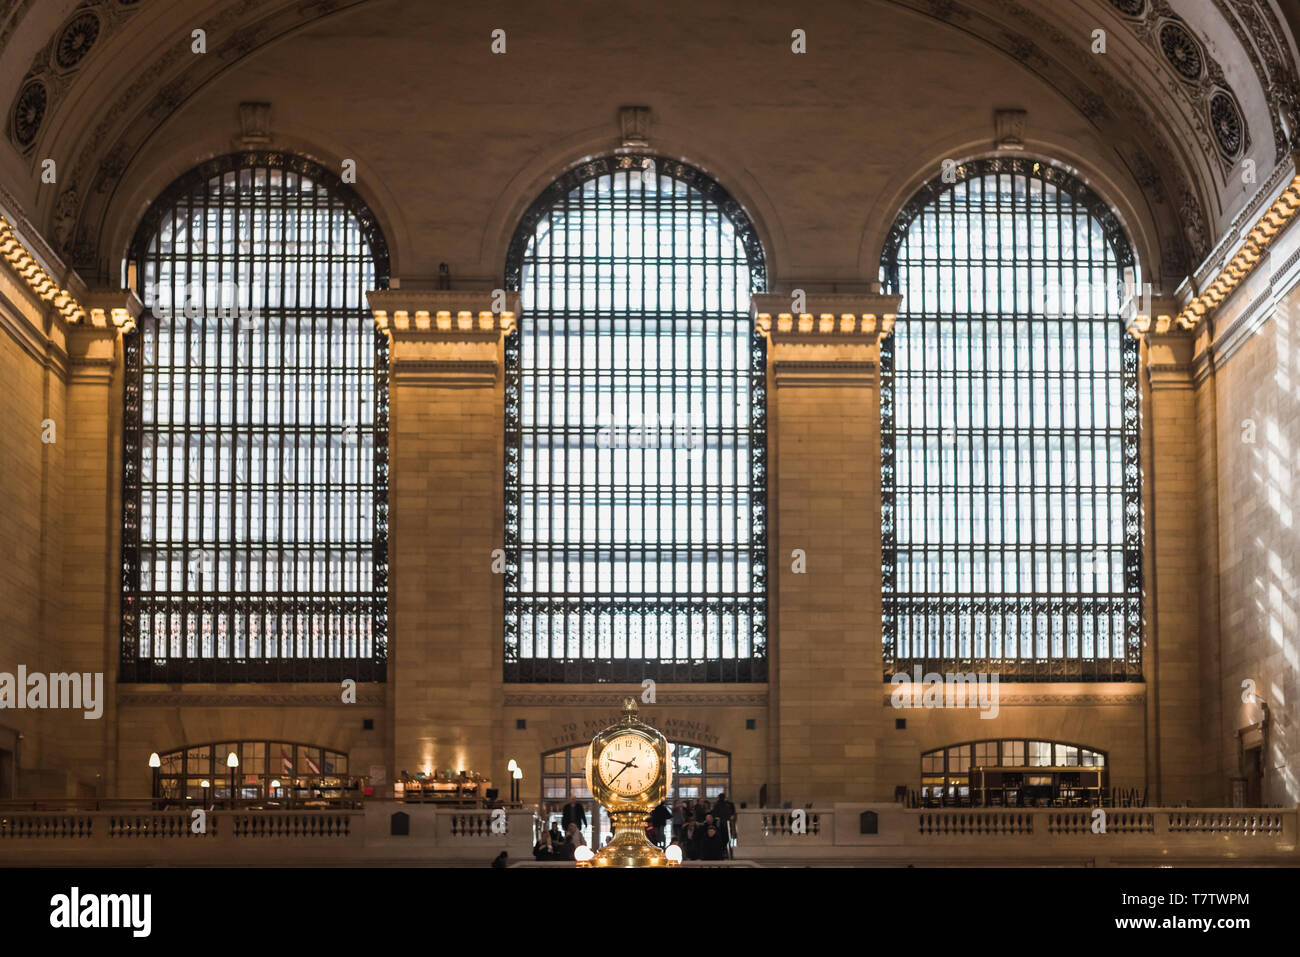 The famous architectural Grand Central Station in New York Stock Photo